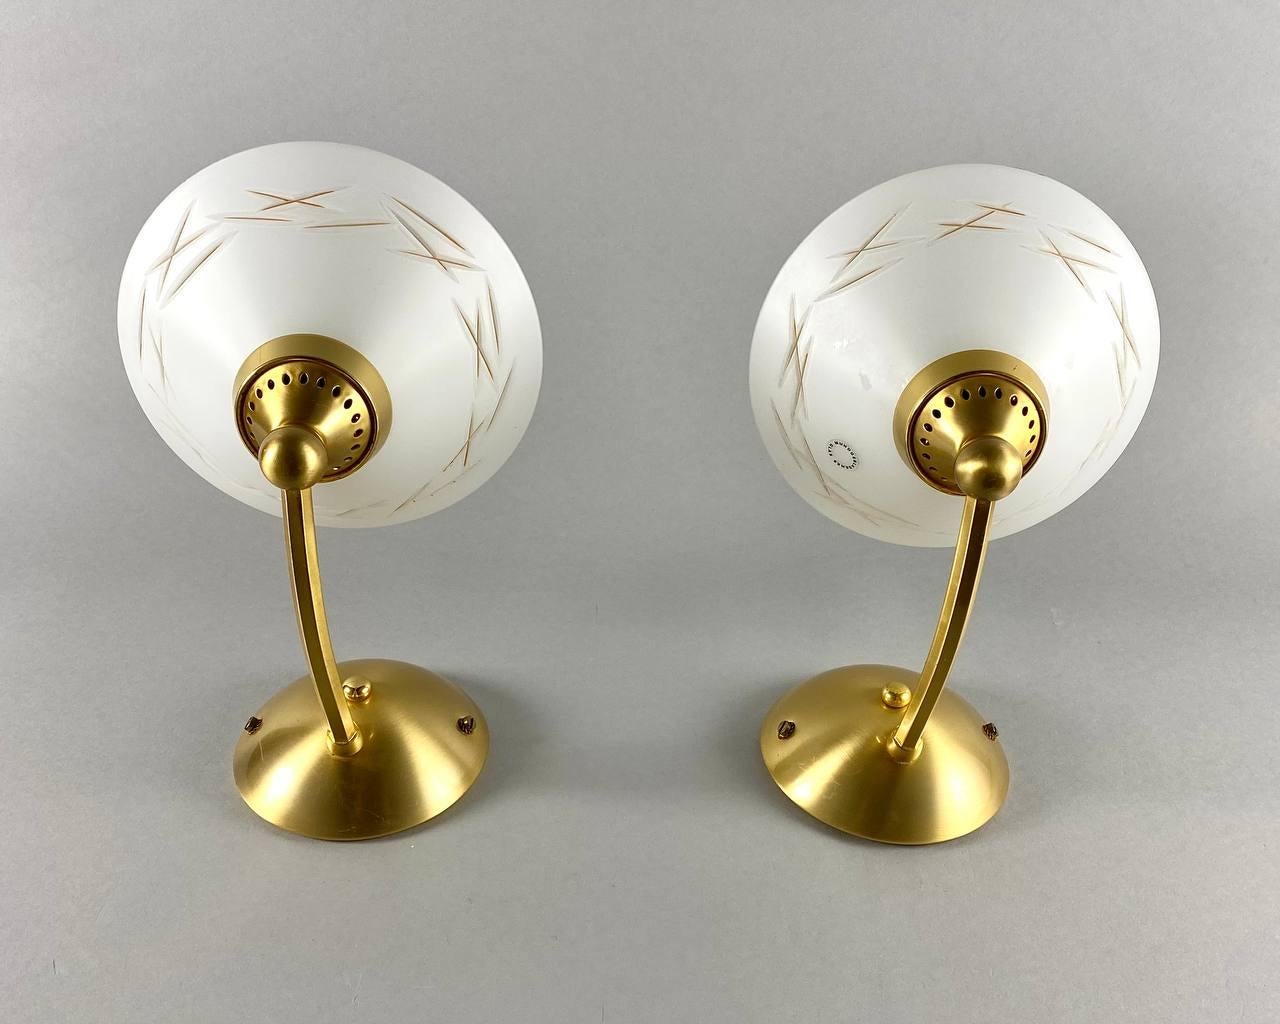 Hand-Blown paired wall sconces. Vintage lighting by Bankamp, Germany.

The designer lamps of this series from famous German manufacturer Bankamp are an excellent purchase for people who prefer elegance and originality in lighting design.  

The